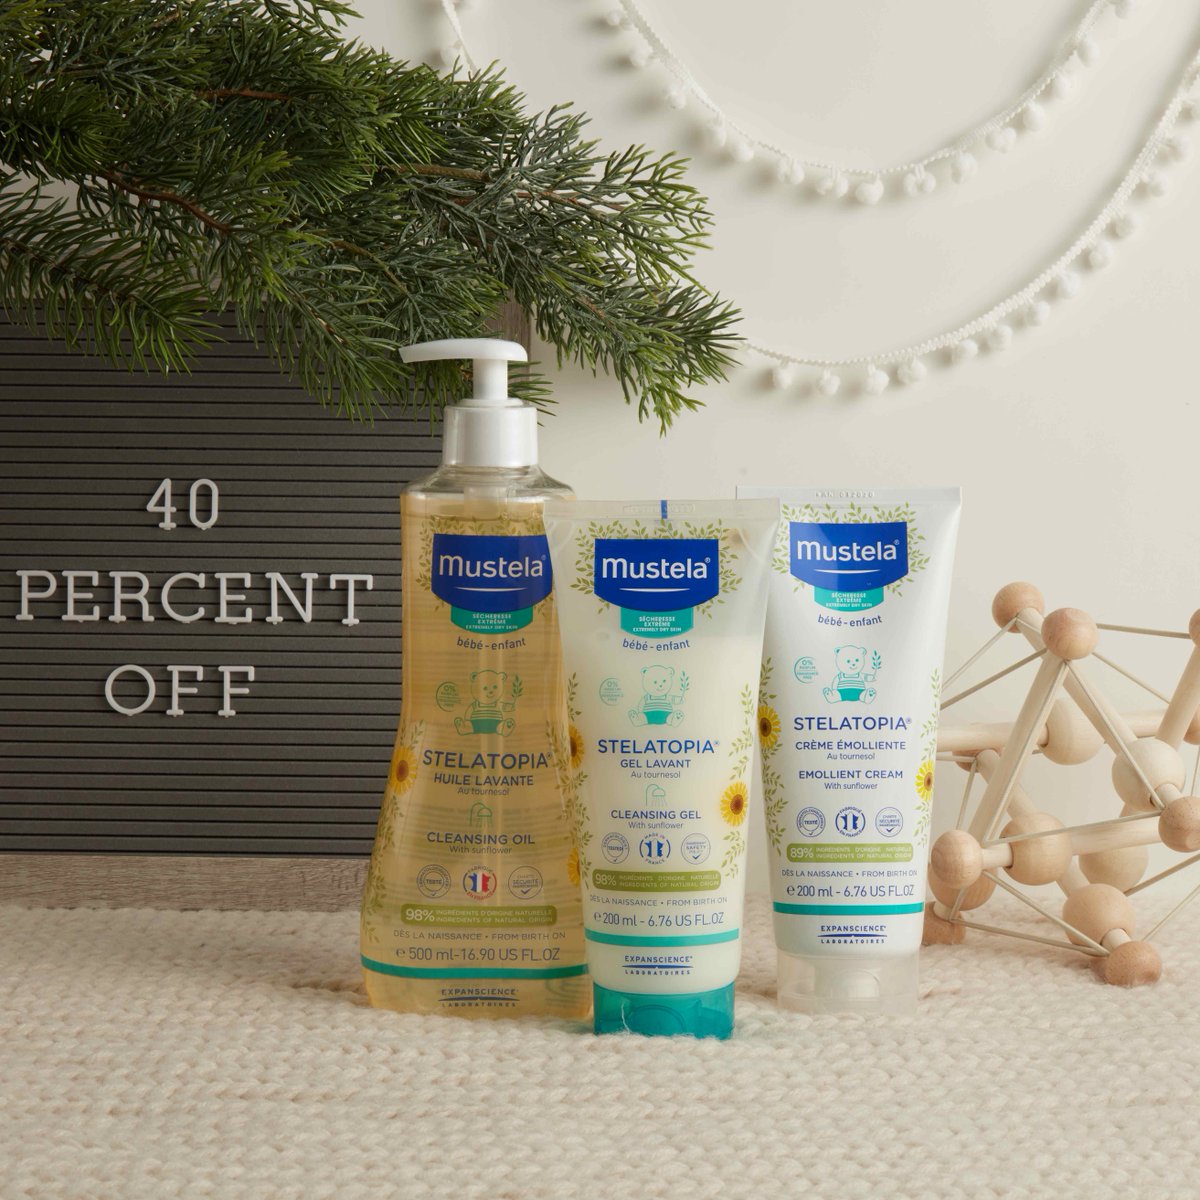 Get 40% Off Sitewide with code: SAVE40⁠
The Stelatopia range for Eczema-prone skin, approved by the National Eczema Association, fragrance-free, and steroid free, hydrate the whole family's skin.⁠👪⁠
bit.ly/MustelaBestSel…
#ByeByeEczema⁠
*End of Sale: 11/30/2020 11:59 PM EST